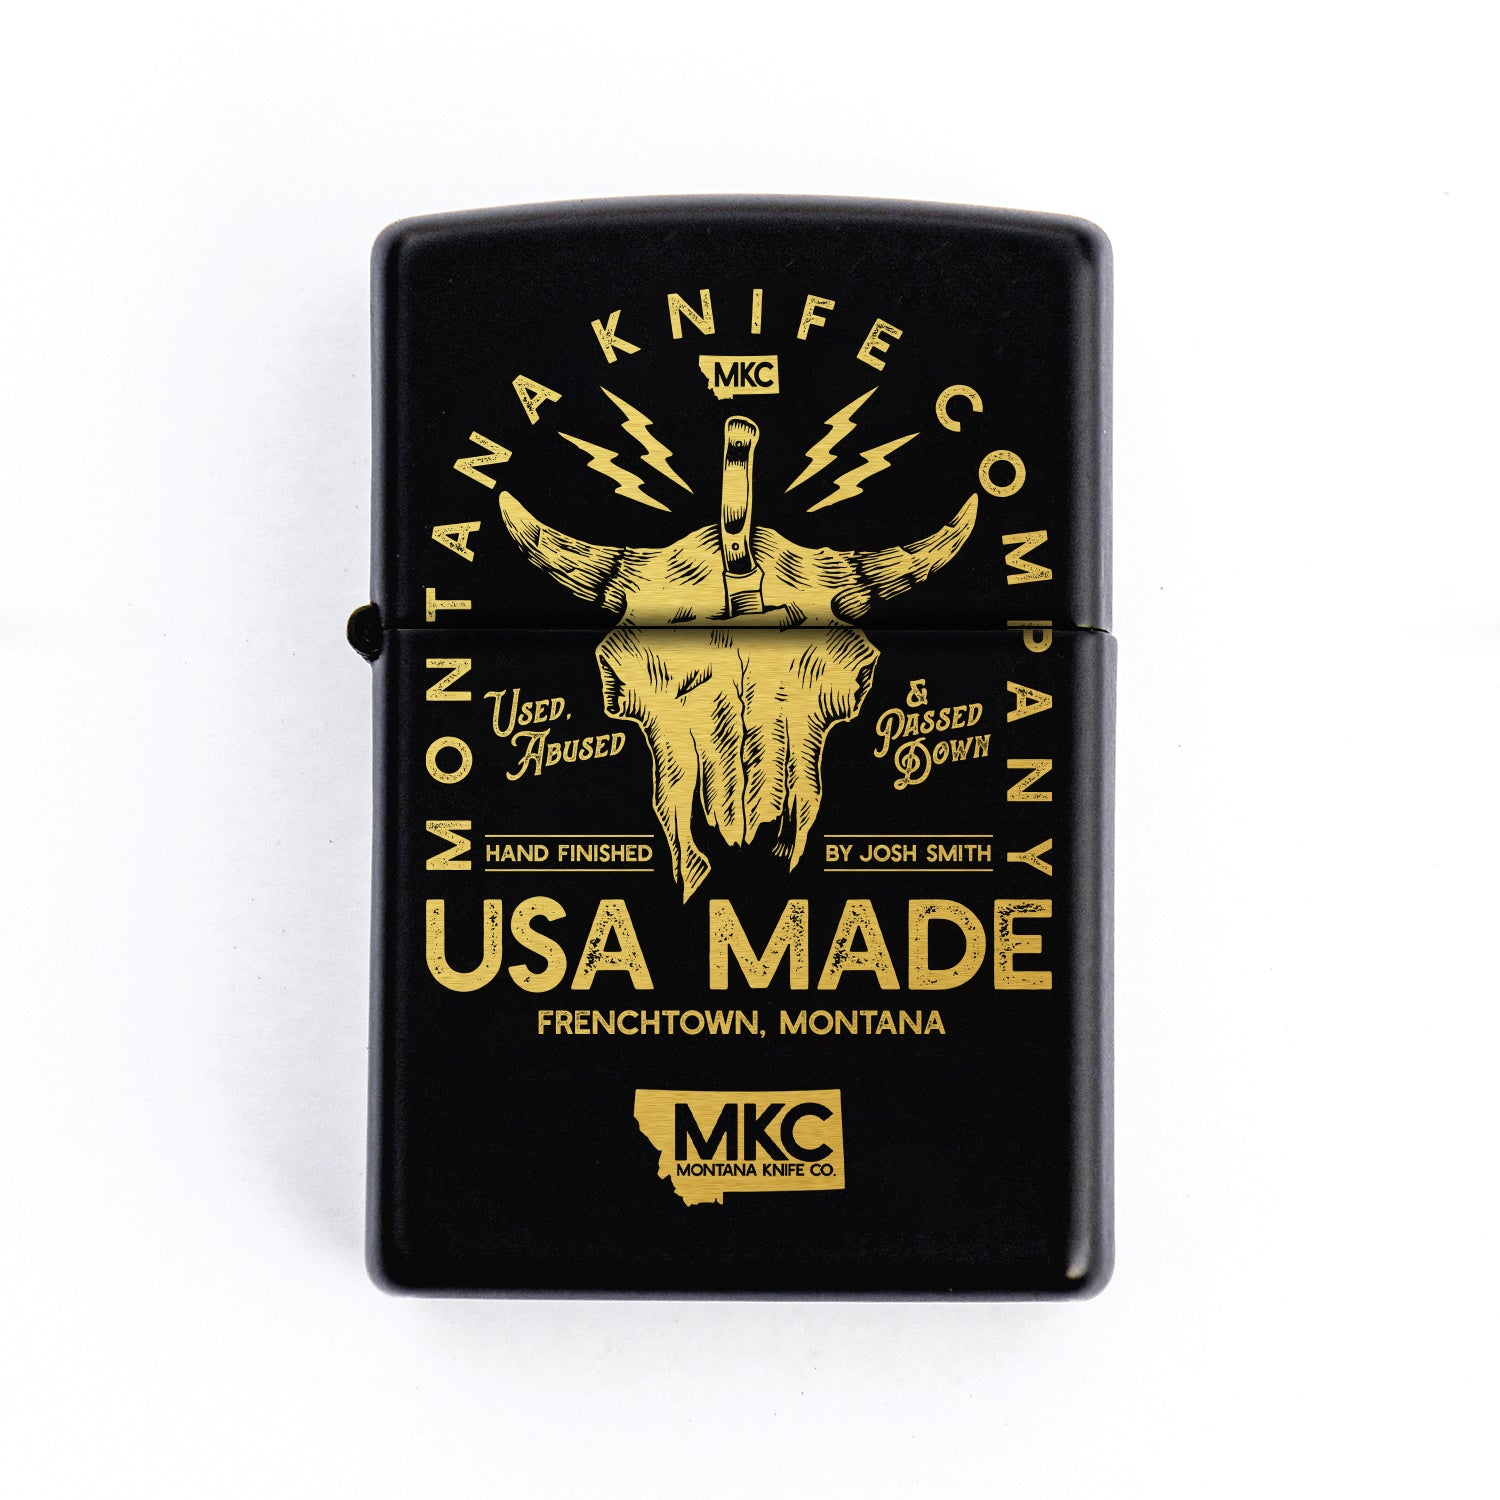 BISON SKULL - TRADITIONAL WINDPROOF ZIPPO LIGHTER - USA MADE